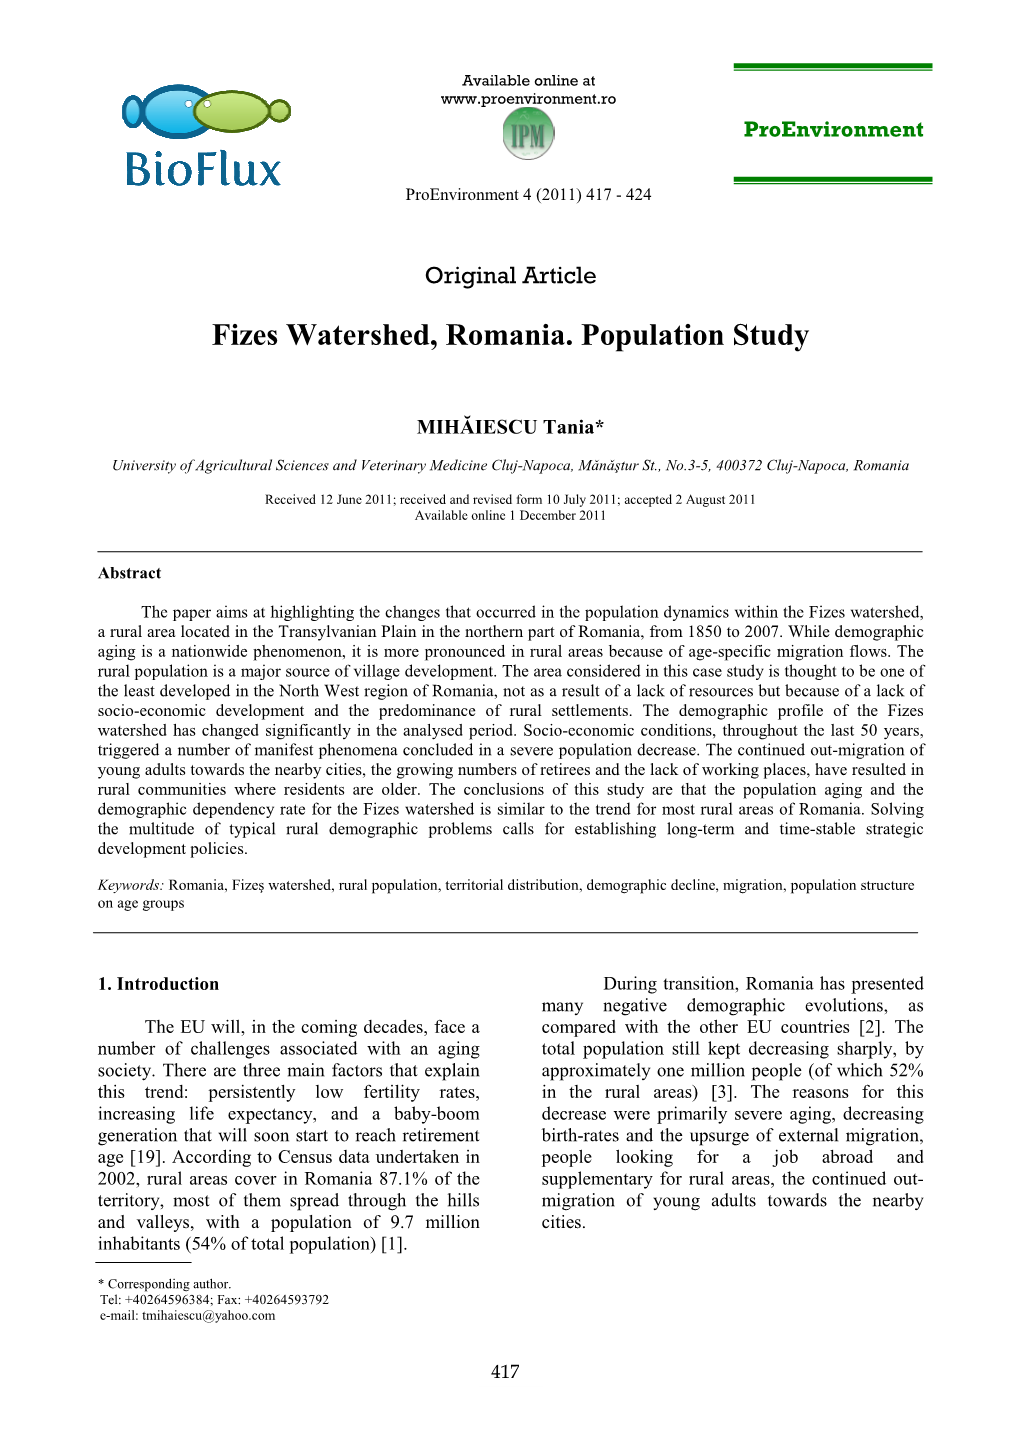 Fizes Watershed, Romania. Population Study